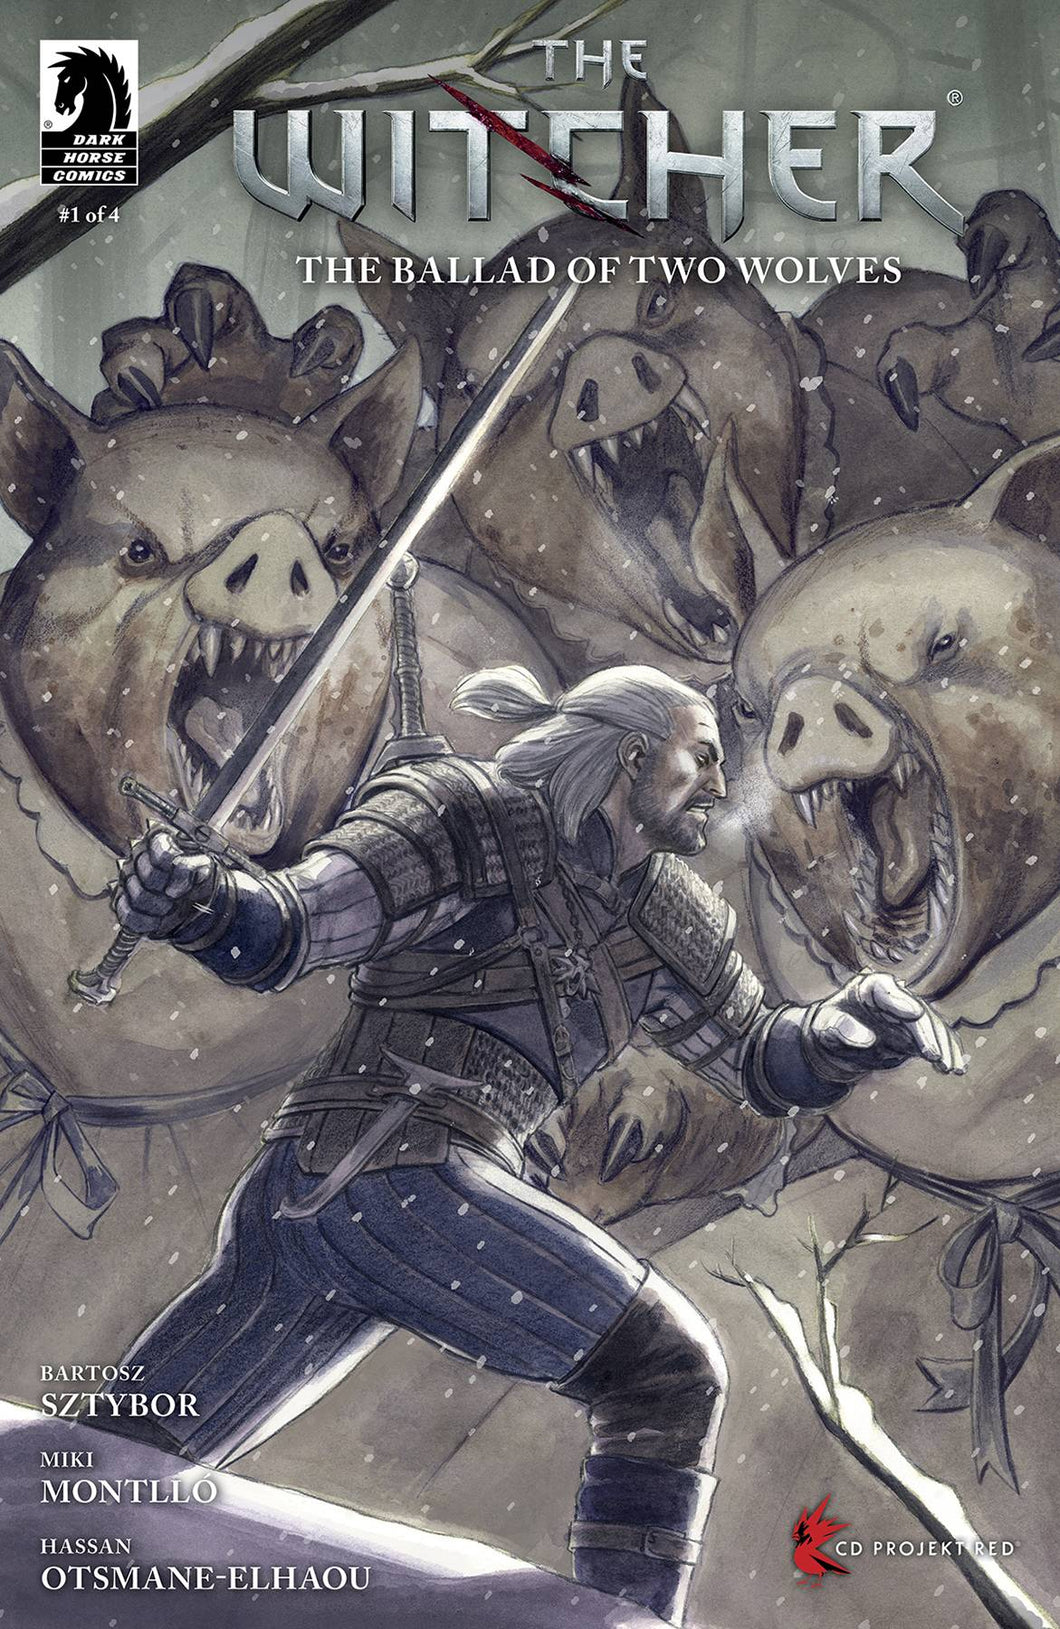 WITCHER THE BALLAD OF TWO WOLVES #1 CVR D LOPEZ